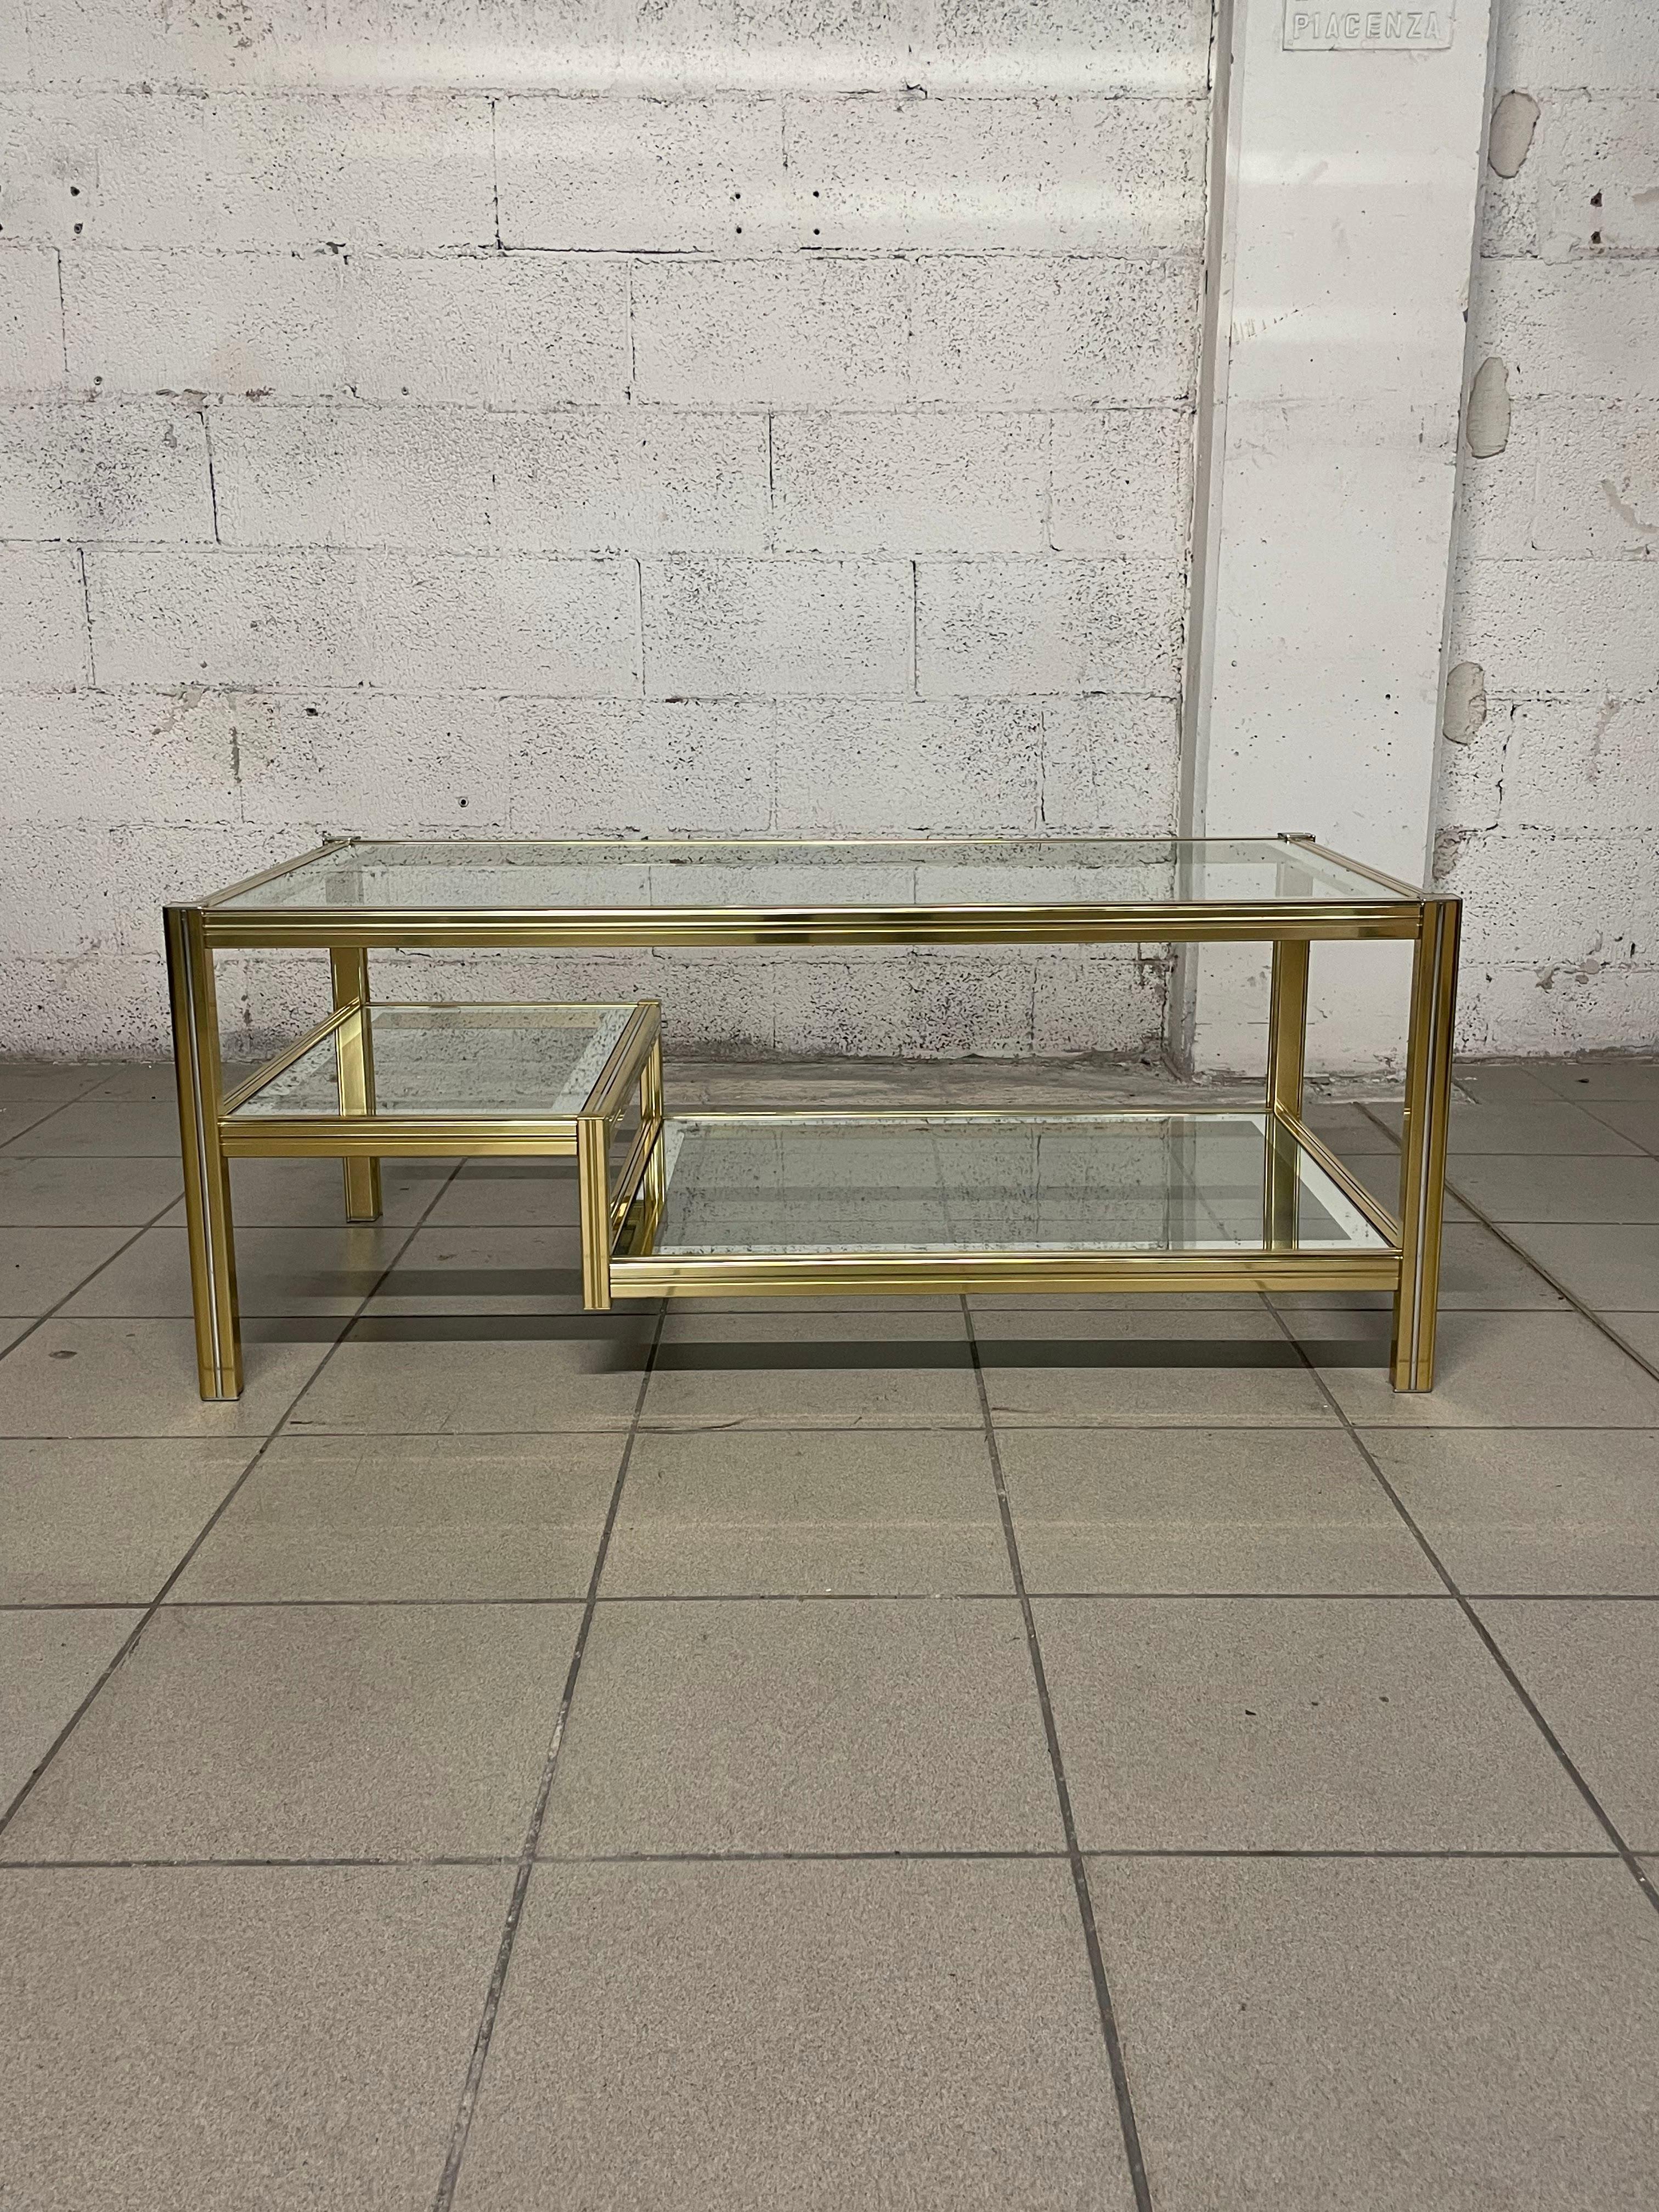 Multi-level 1970s coffee table.
Brass frame with glass shelves.
A beautiful wavy, elegant line offers this coffee table its contemporary character and adaptable to any environment.
